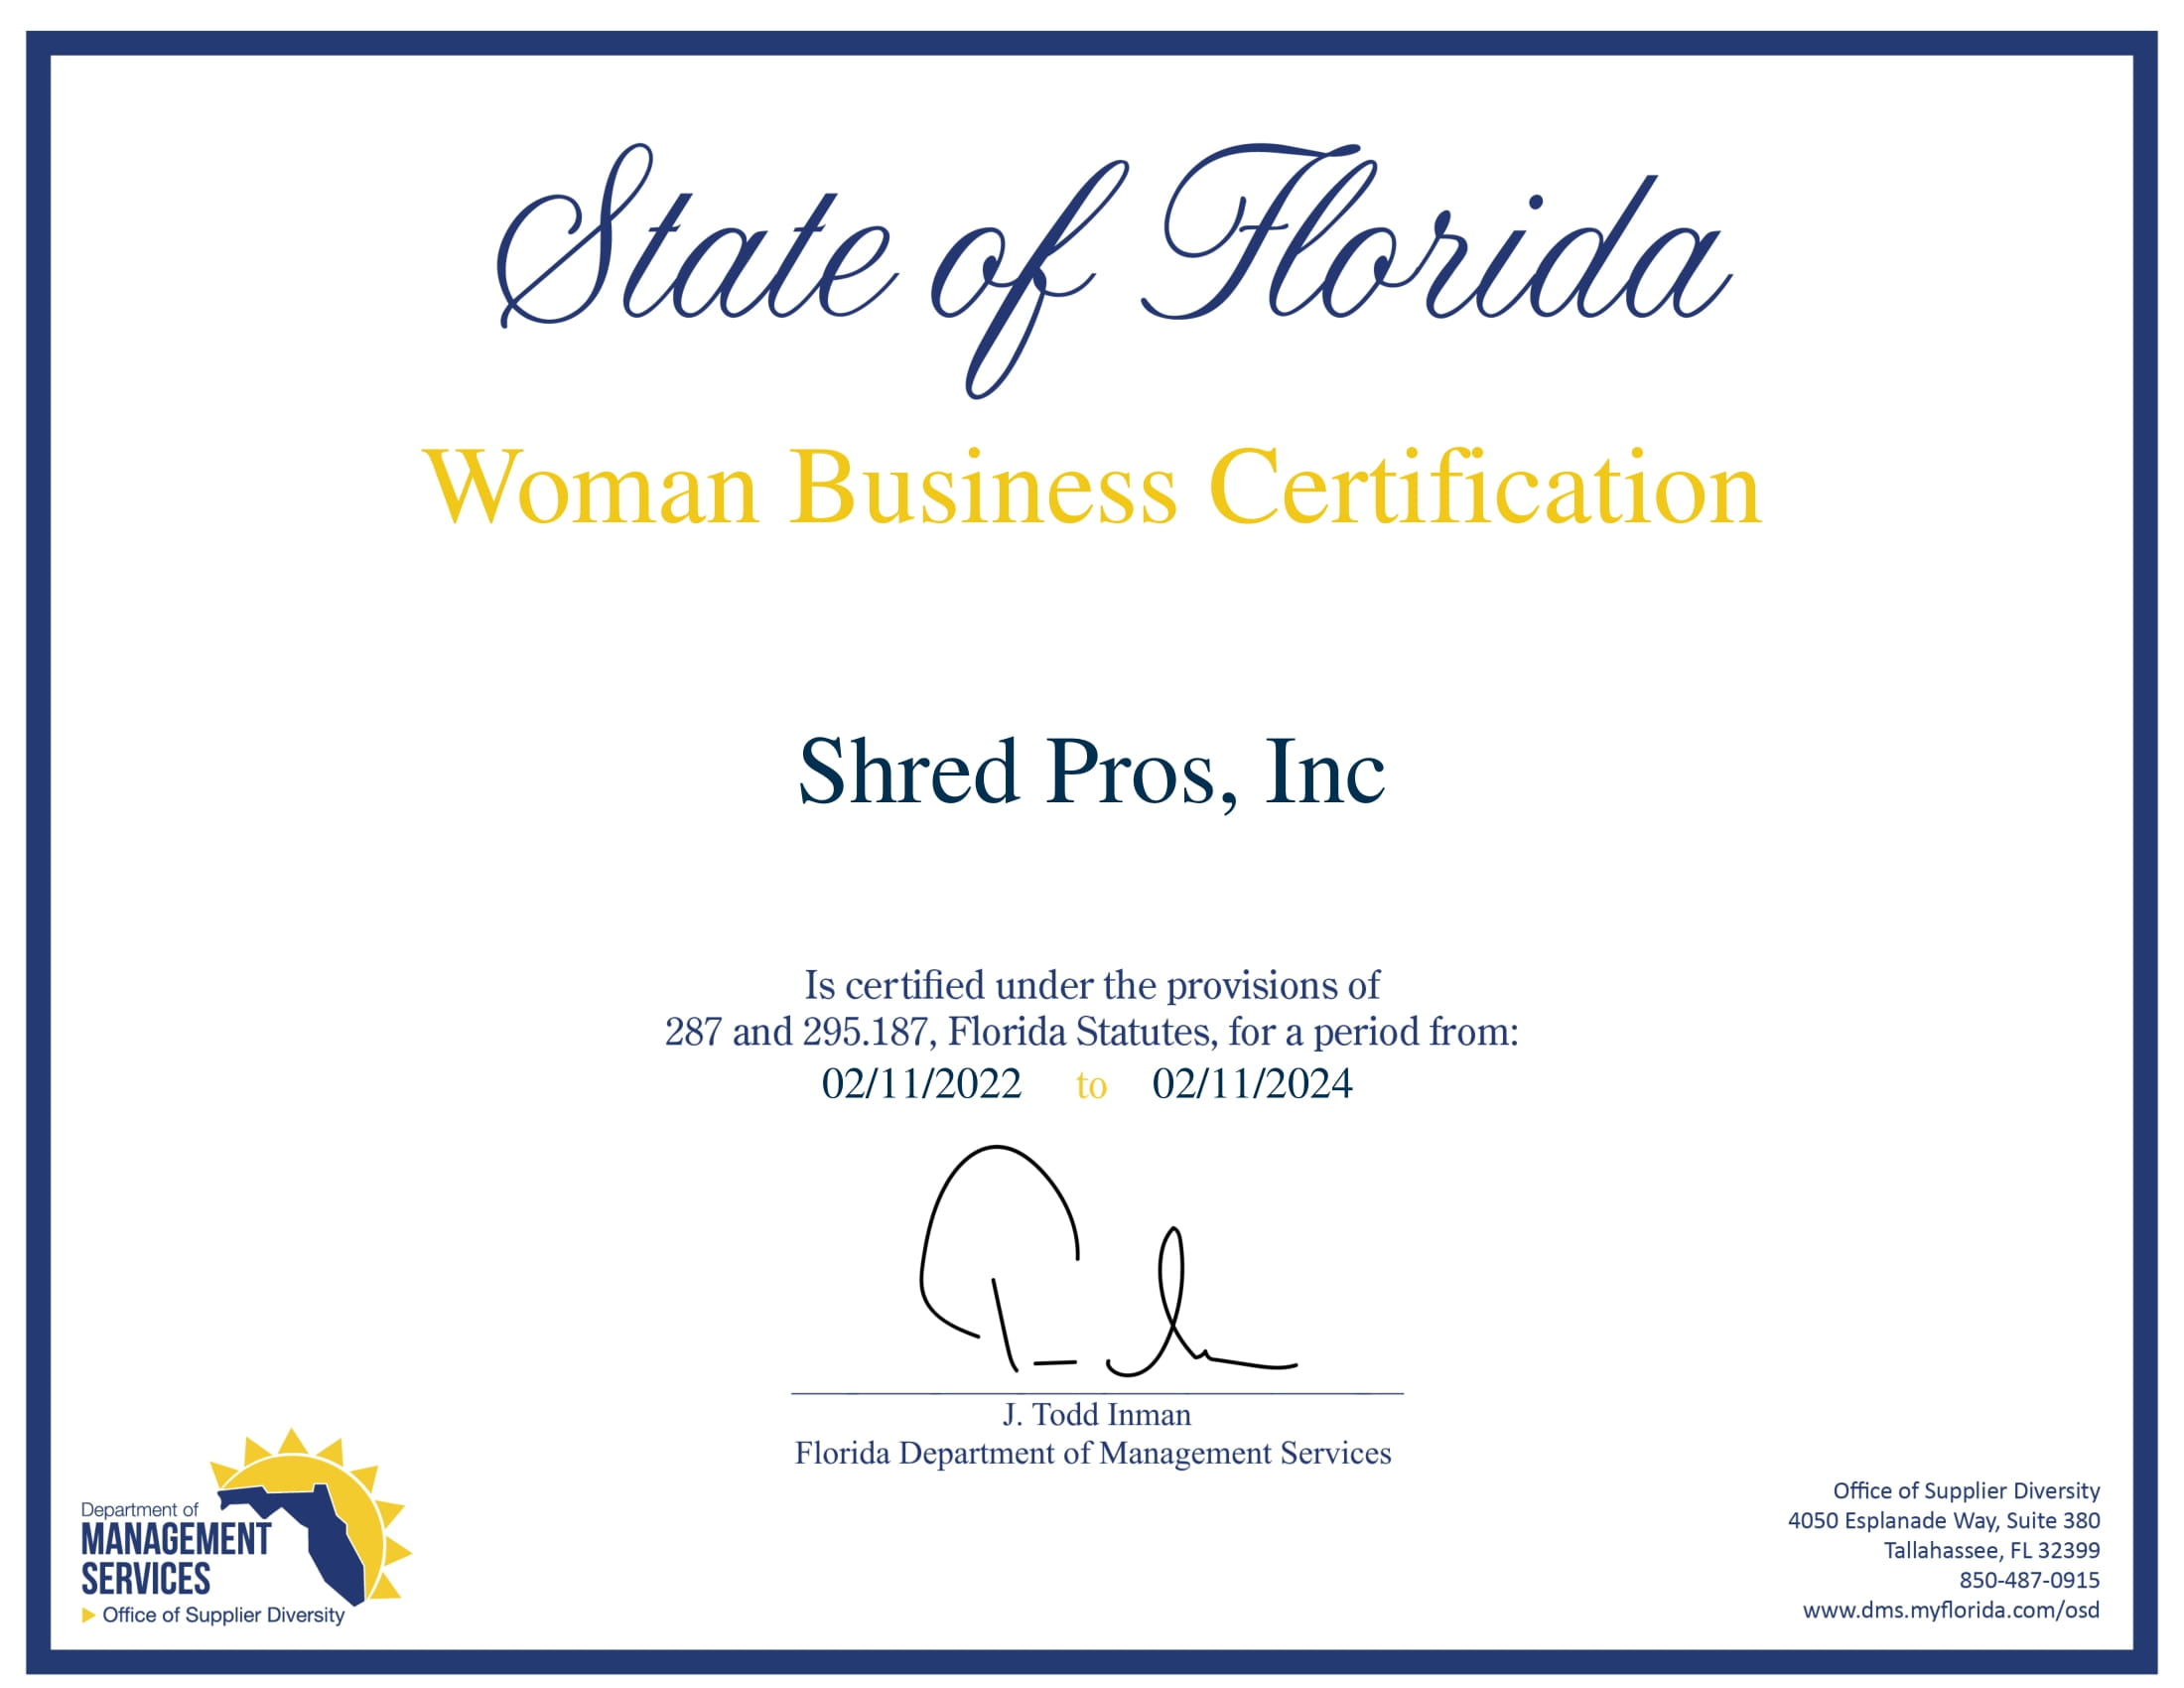 Woman Business Certificate